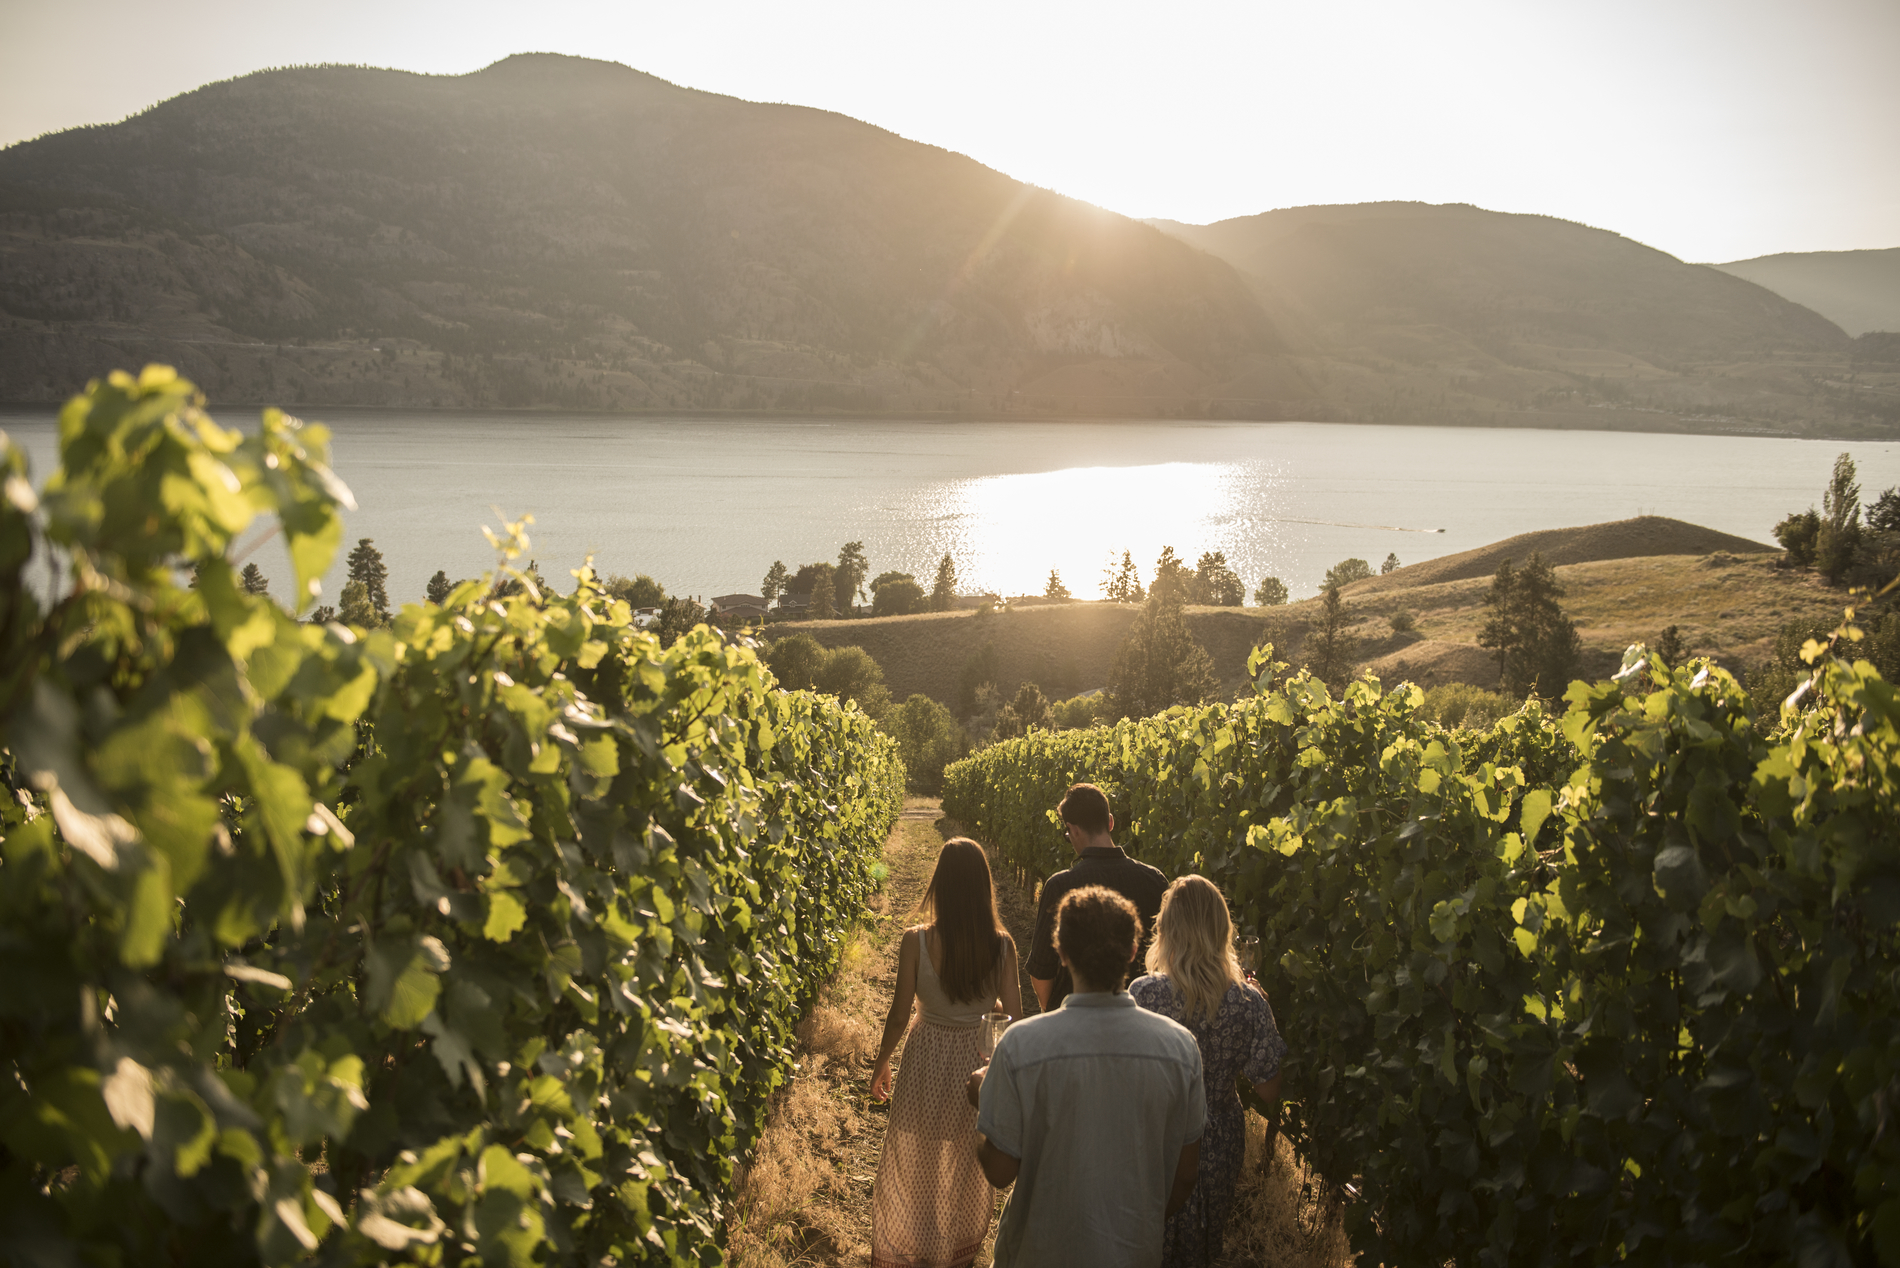 Four people walk through the vineyards towards the Skaha Lake at Painted Rock Estate Winery Ltd. The sun sets over the lake and leafy vines are seen in the foreground.